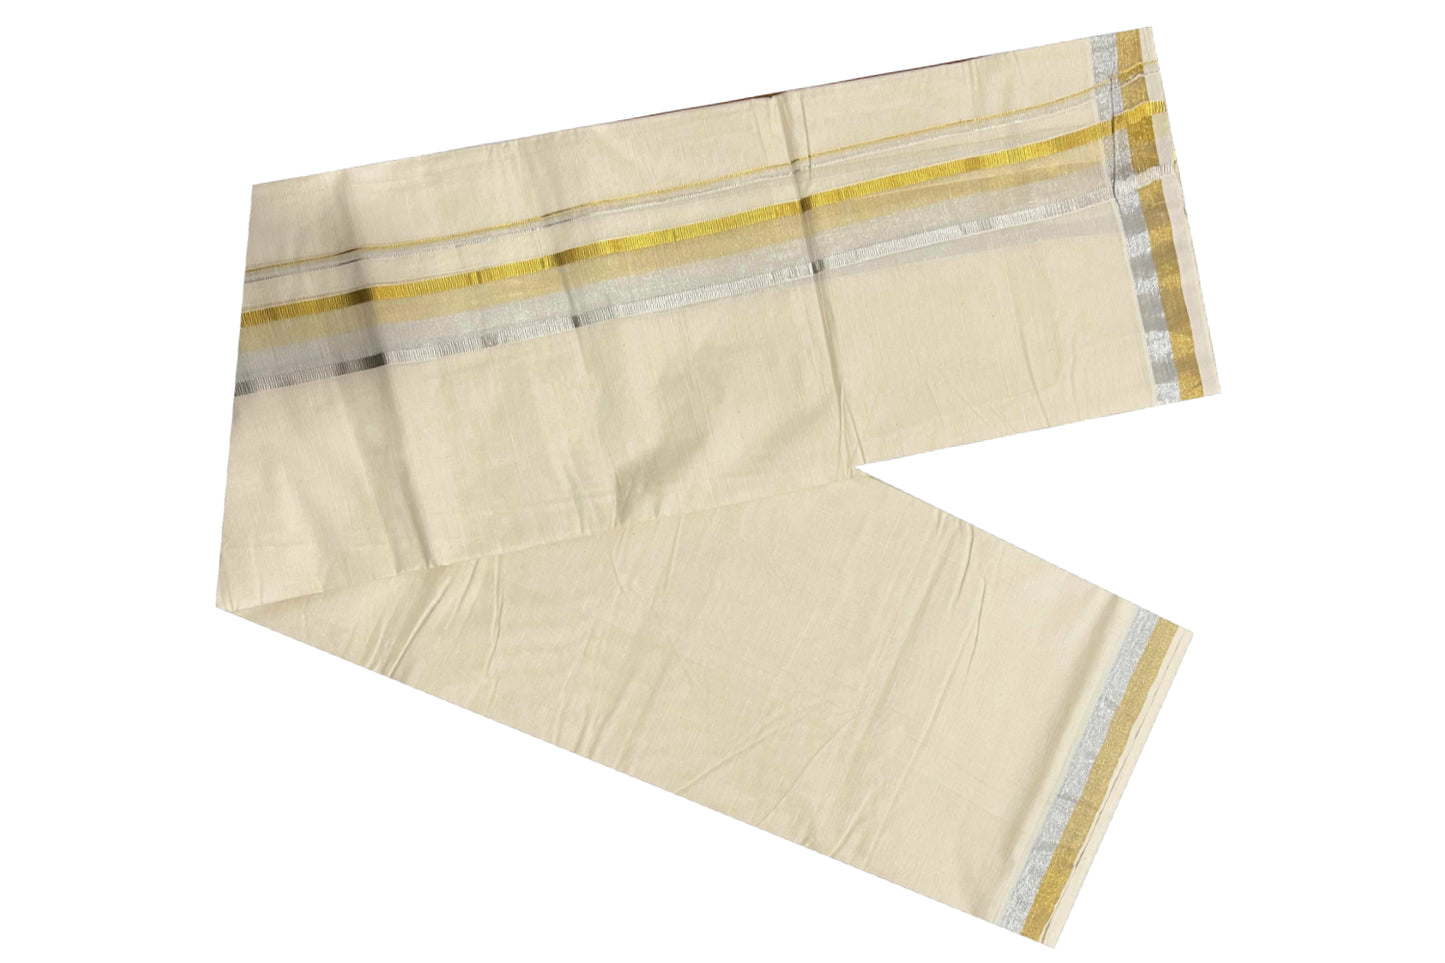 Off White Kerala Double Mundu with Silver and Golden Kasavu Border (South Indian Dhoti)